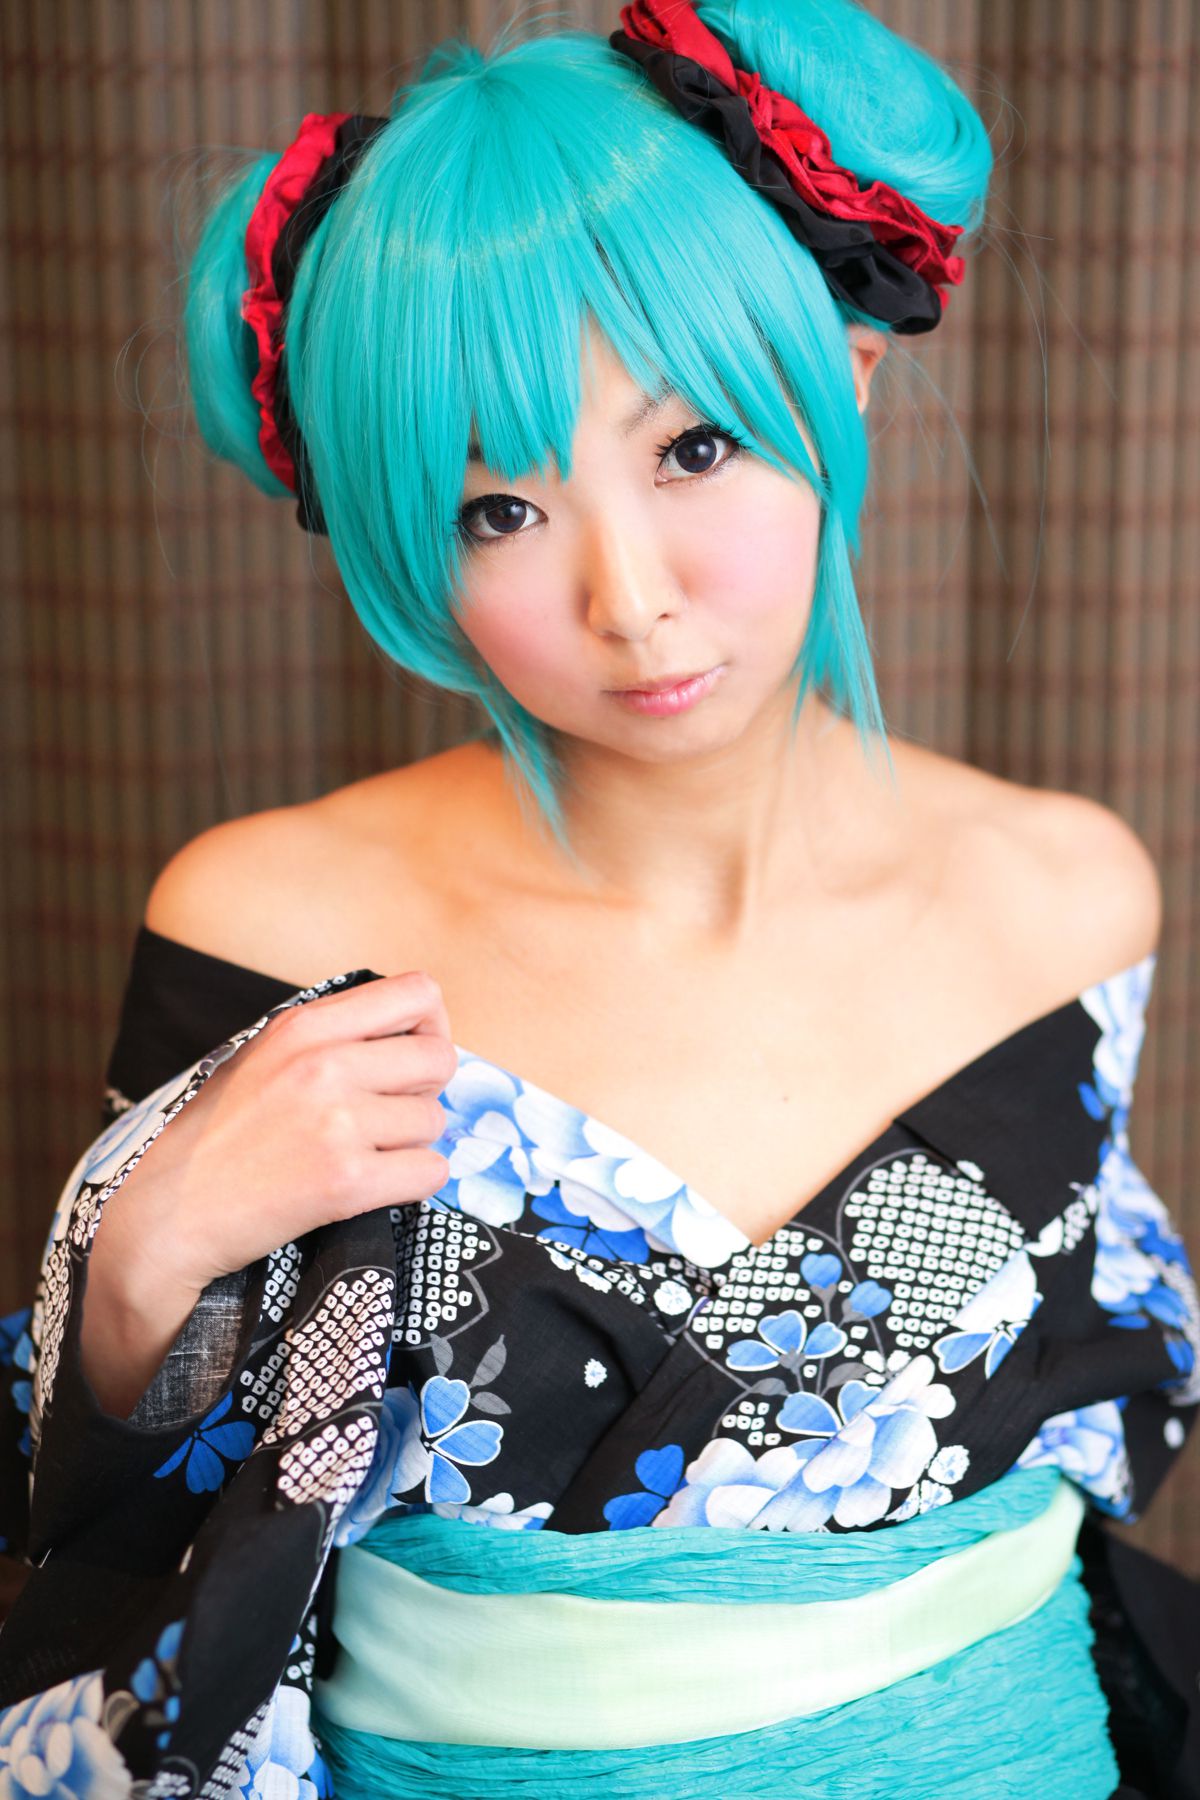 taotuhome[Cosplay] Necoco as Hatsune Miku from Vocaloid 套图第104张